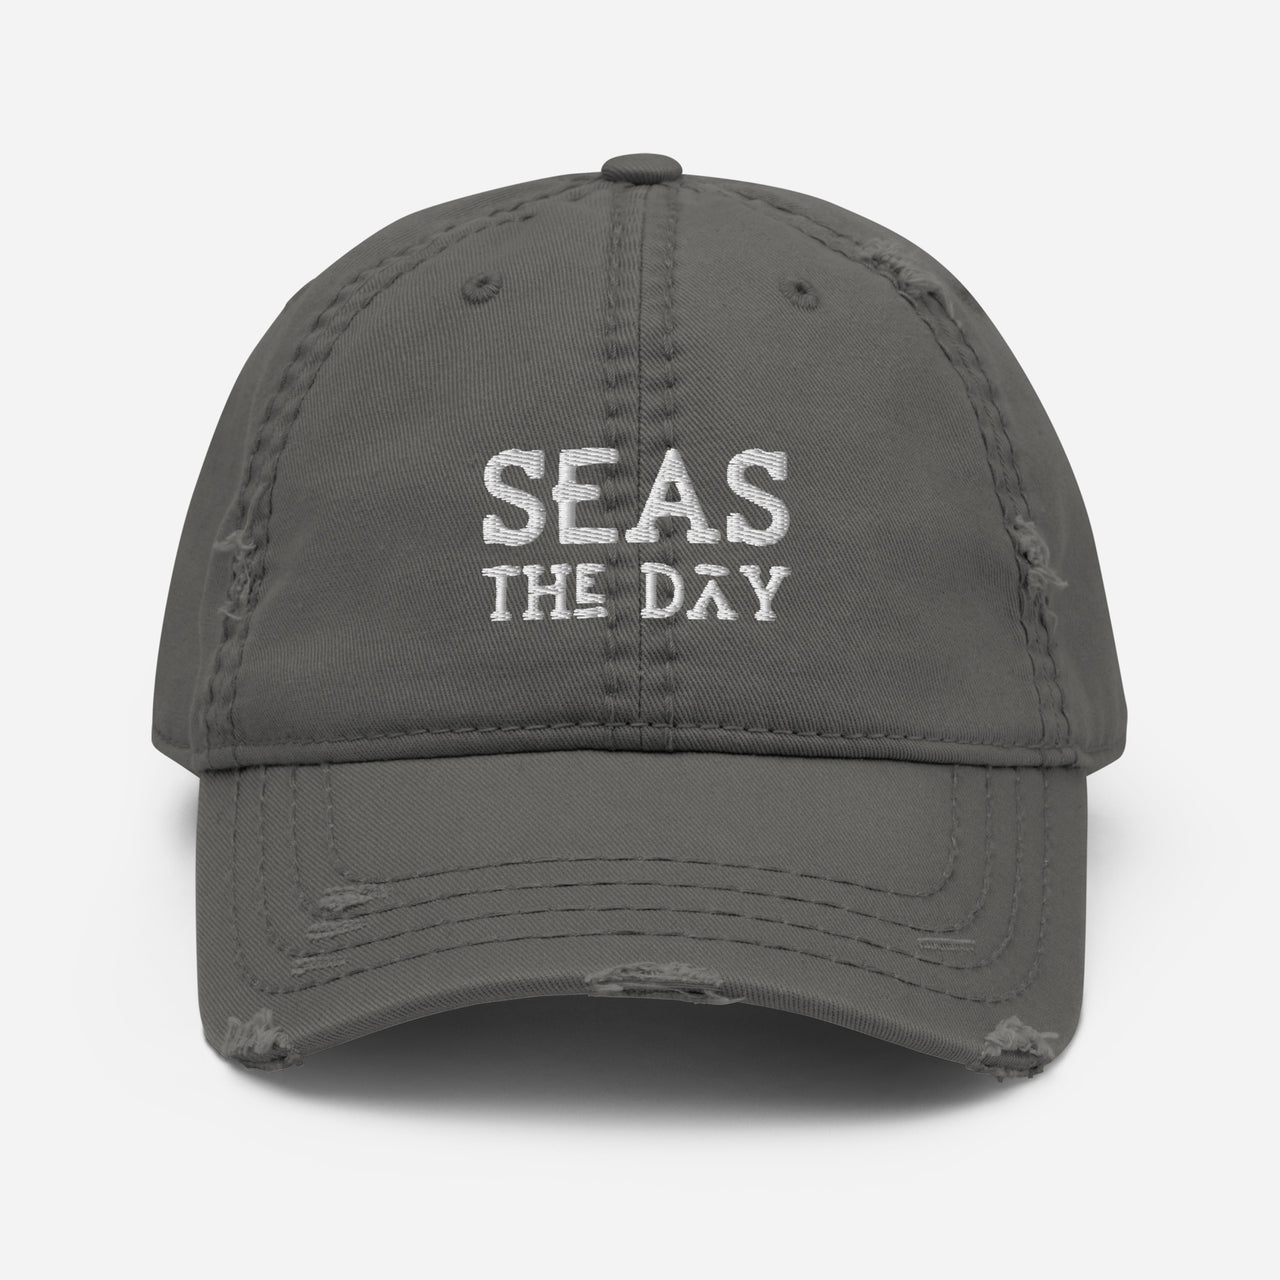 Seas The Day Distressed Hat, Baseball Cap, Charcoal